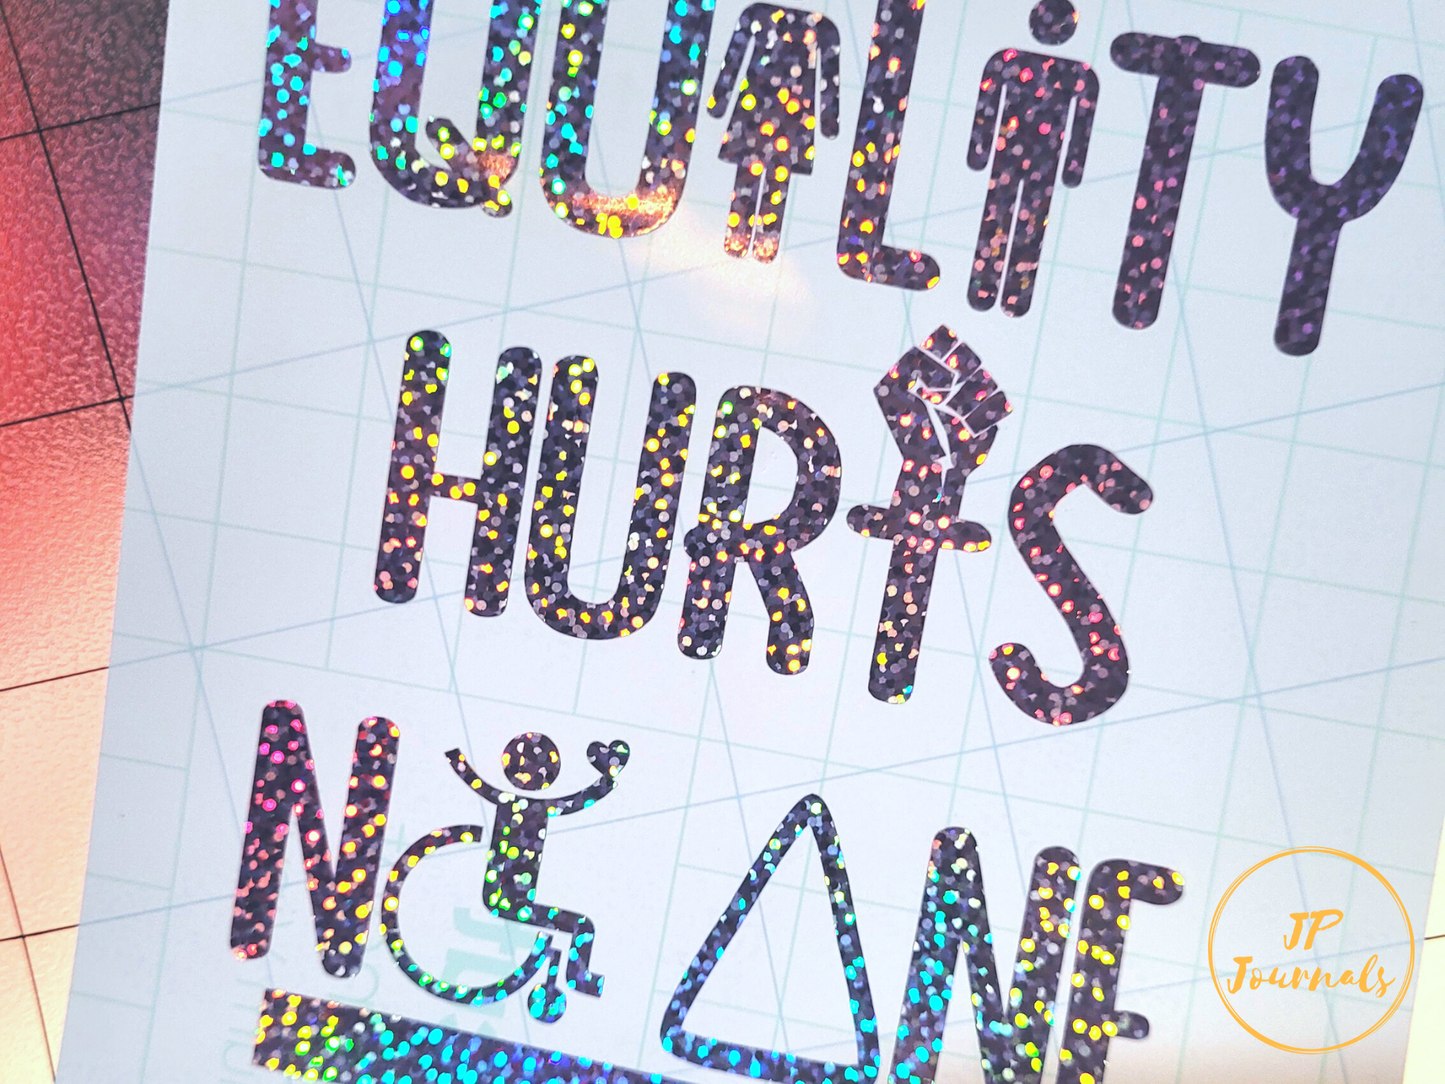 Equality Hurts No One Vinyl Decal, Equal Rights for Everyone, Disability Rights, LGBTQ+ Rights, Black Lives Matter Vinyl Sticker Decal